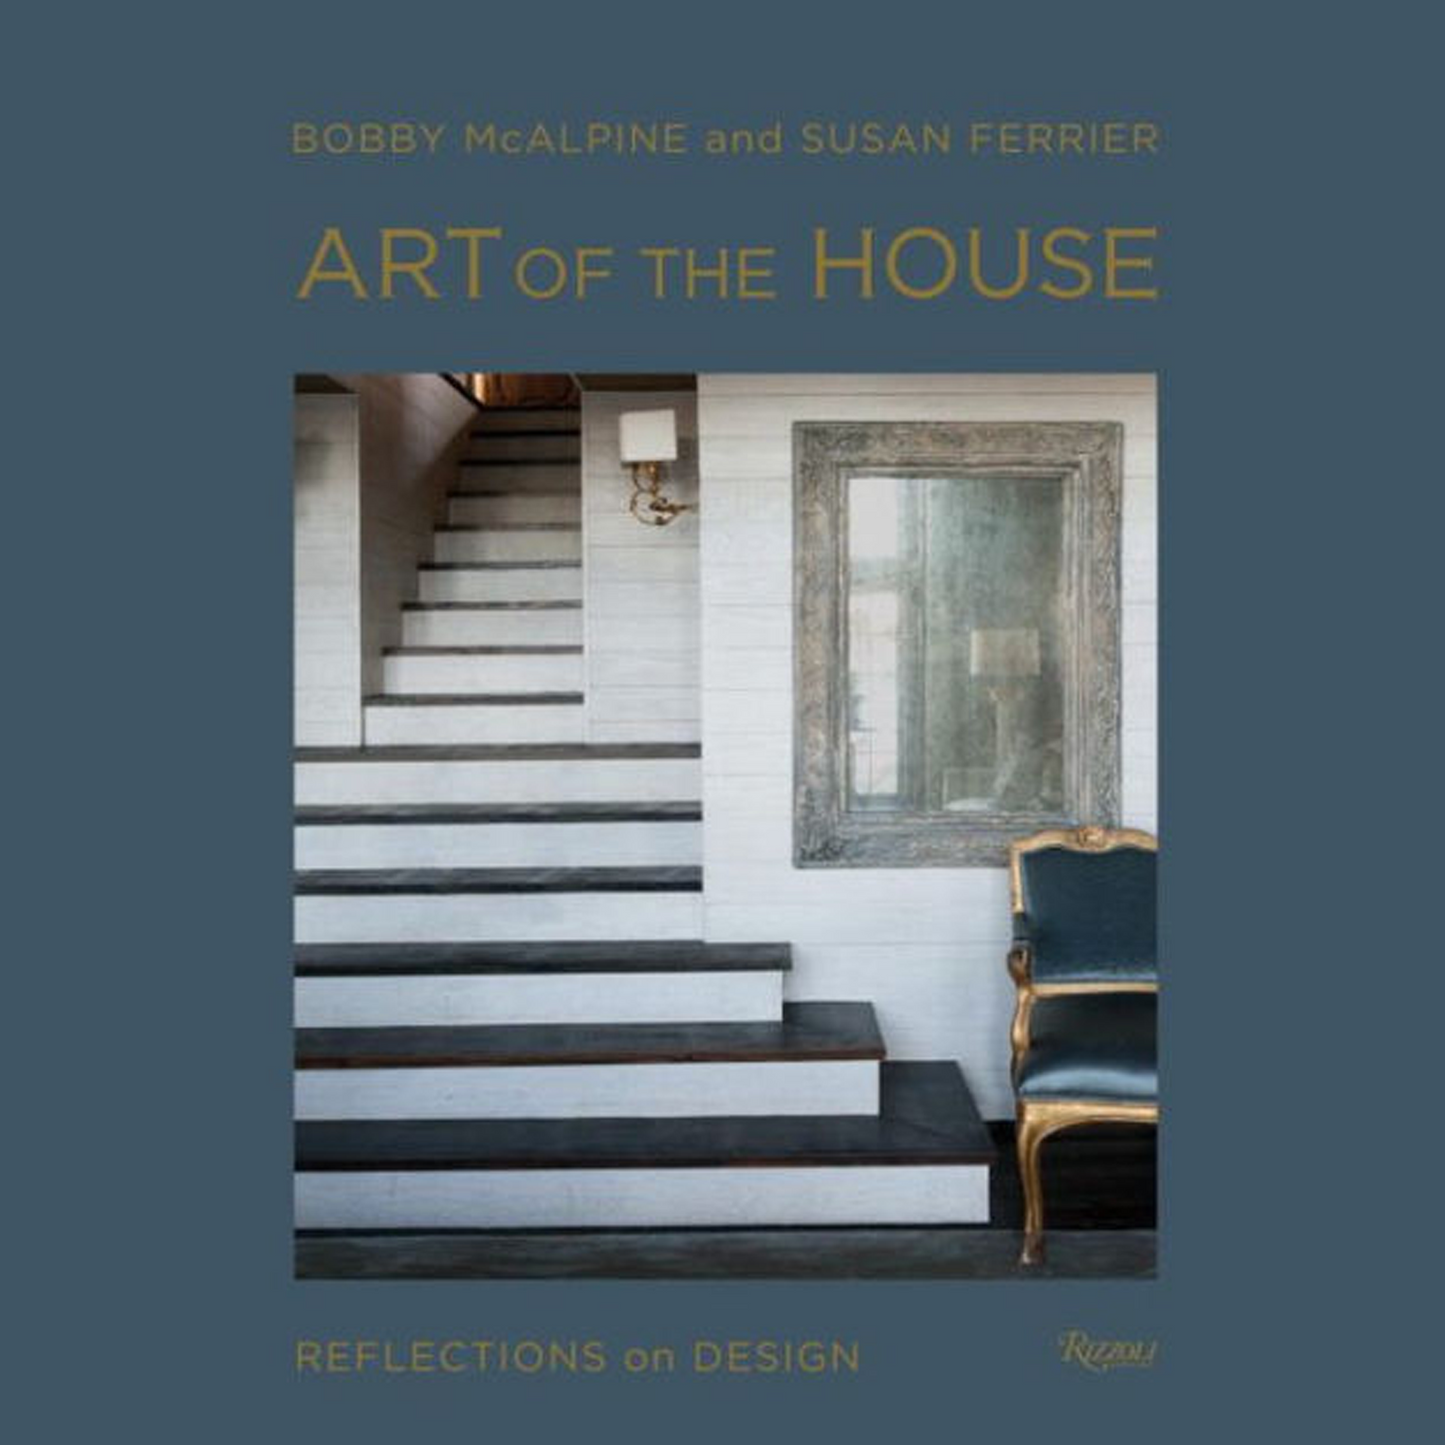 Art of the House by Bobby McAlpine & Susan Ferrier